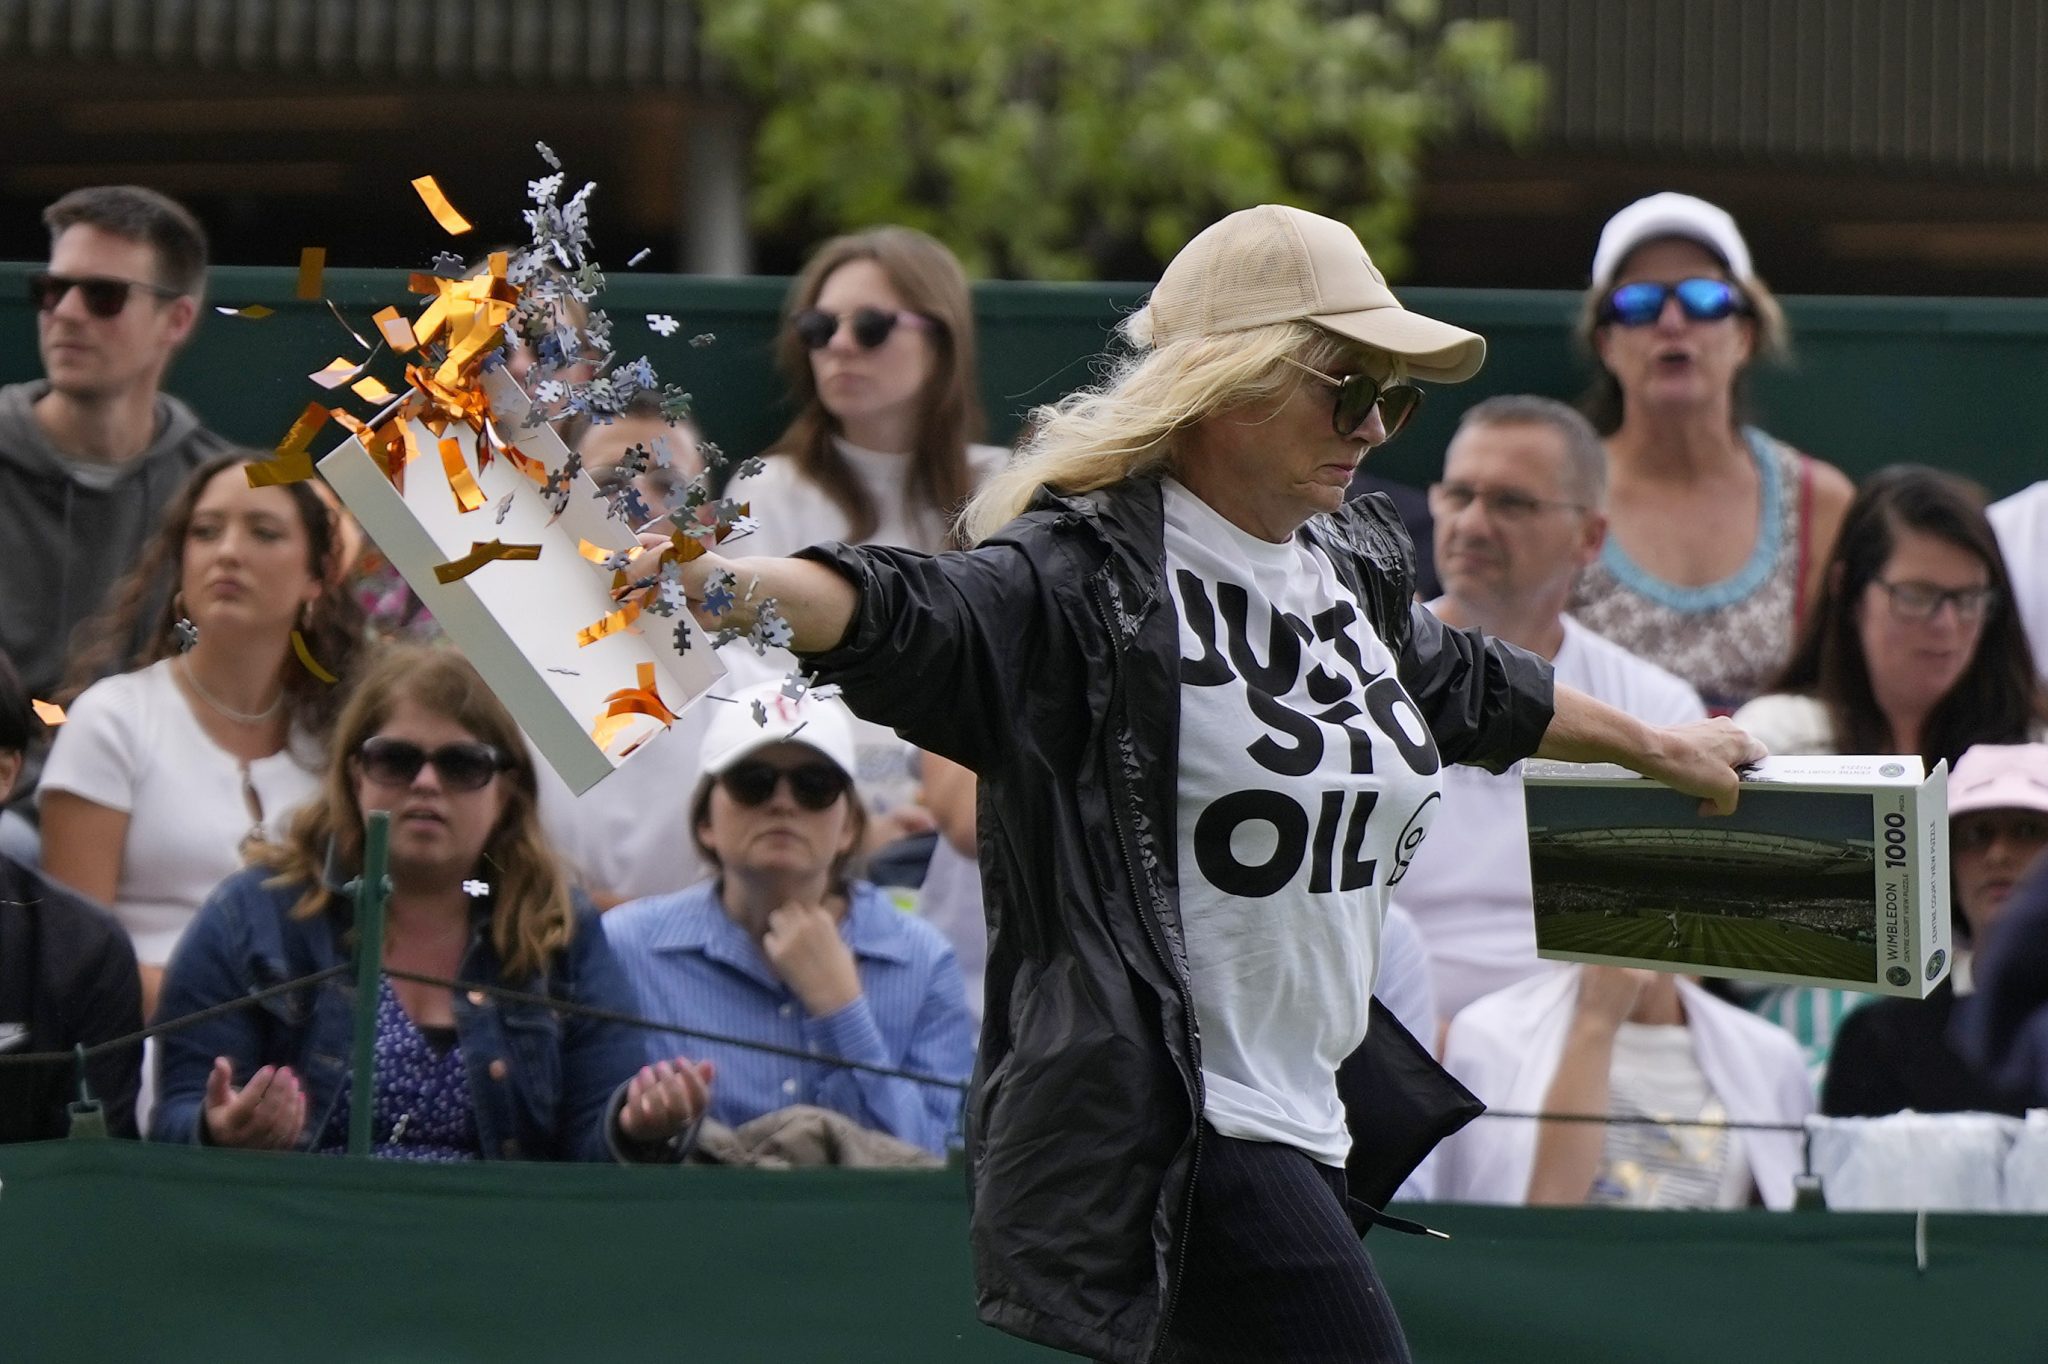 Arrests made after two Just Stop Oil protesters disrupt play at Wimbledon